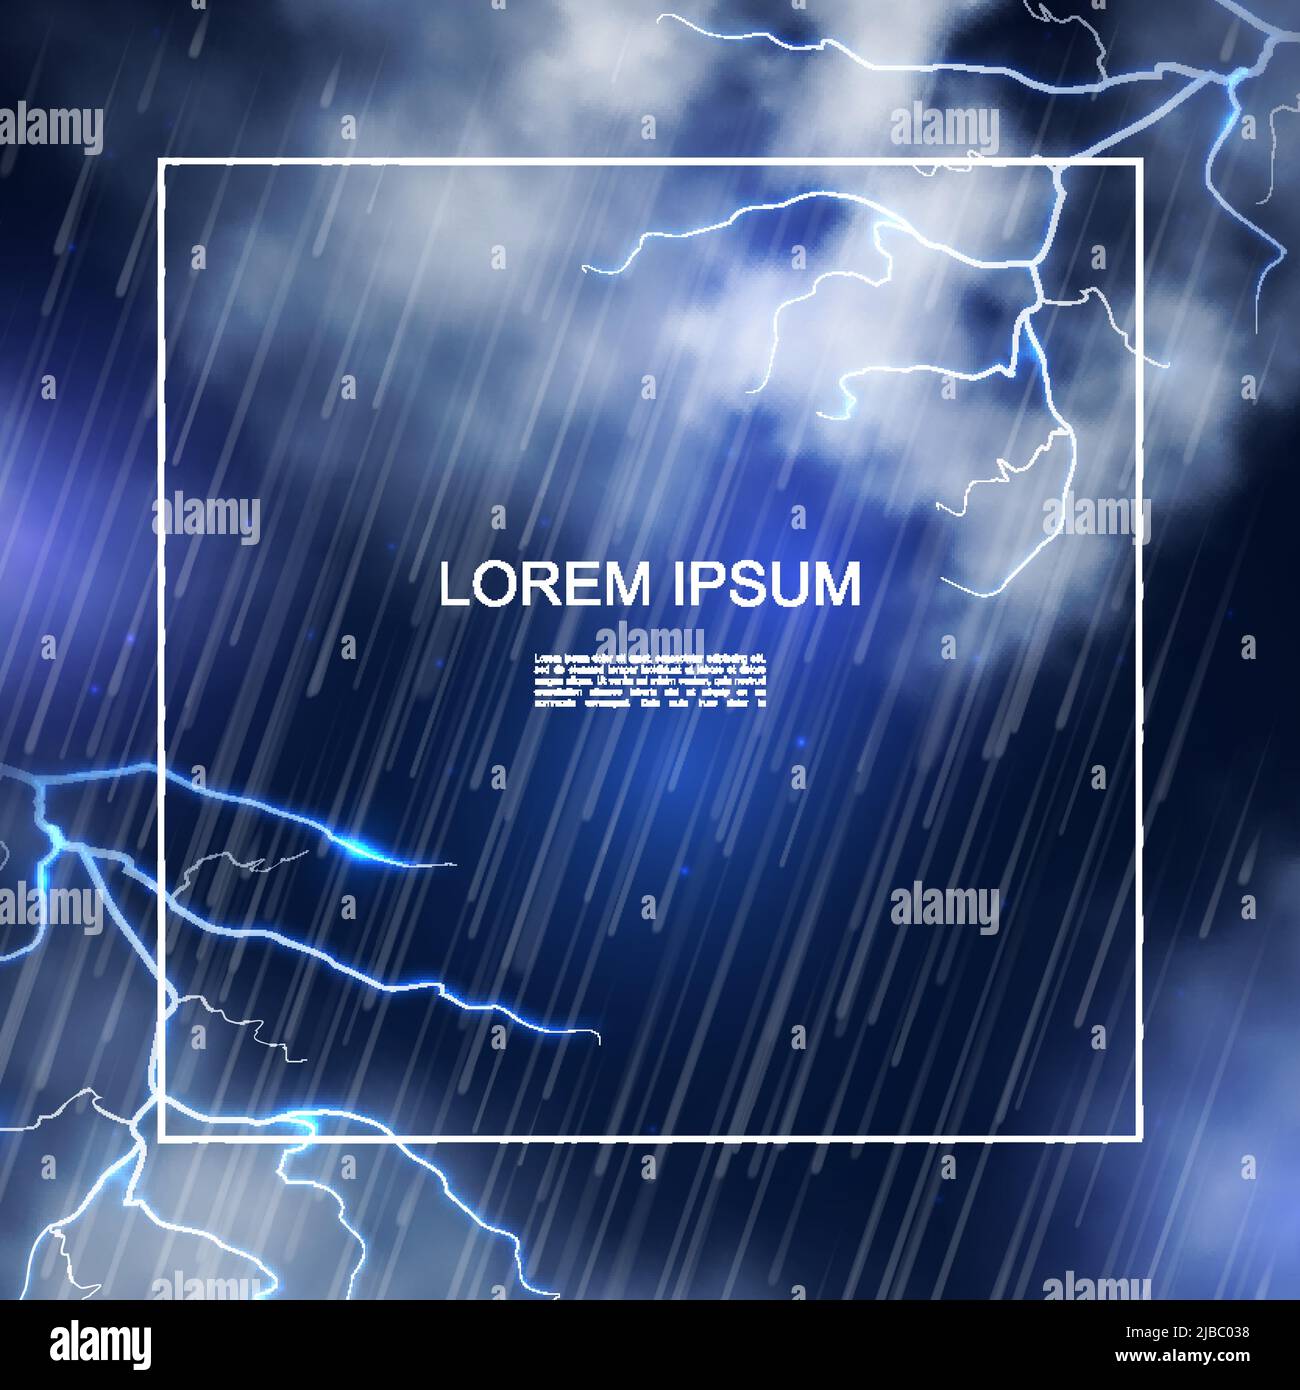 Realistic water storm poster with frame for text heavy rain clouds and thunderbolts on night sky background vector illustration Stock Vector